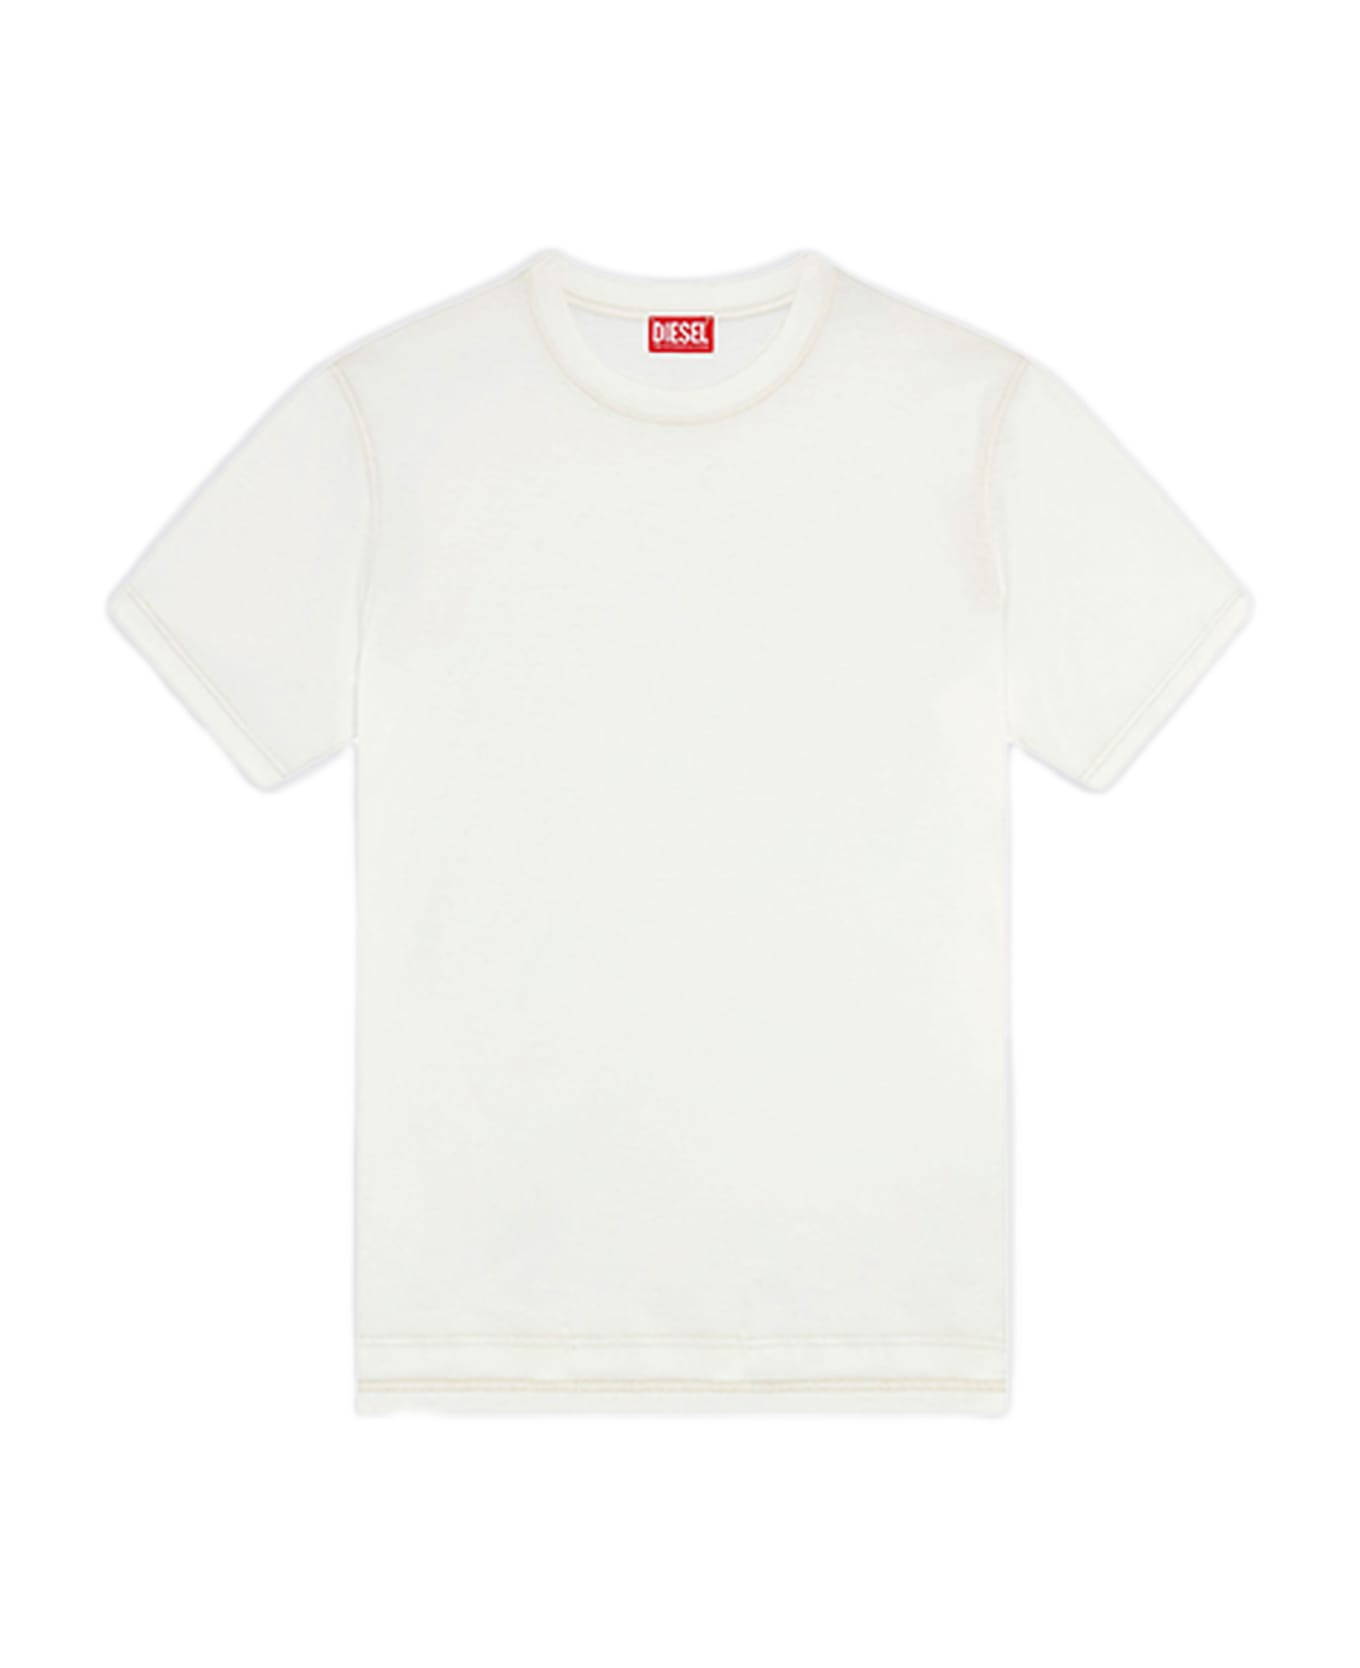 Diesel T-must-slits-n2 White Cotton T-shirt With Tonal Print - T Must Slits N2